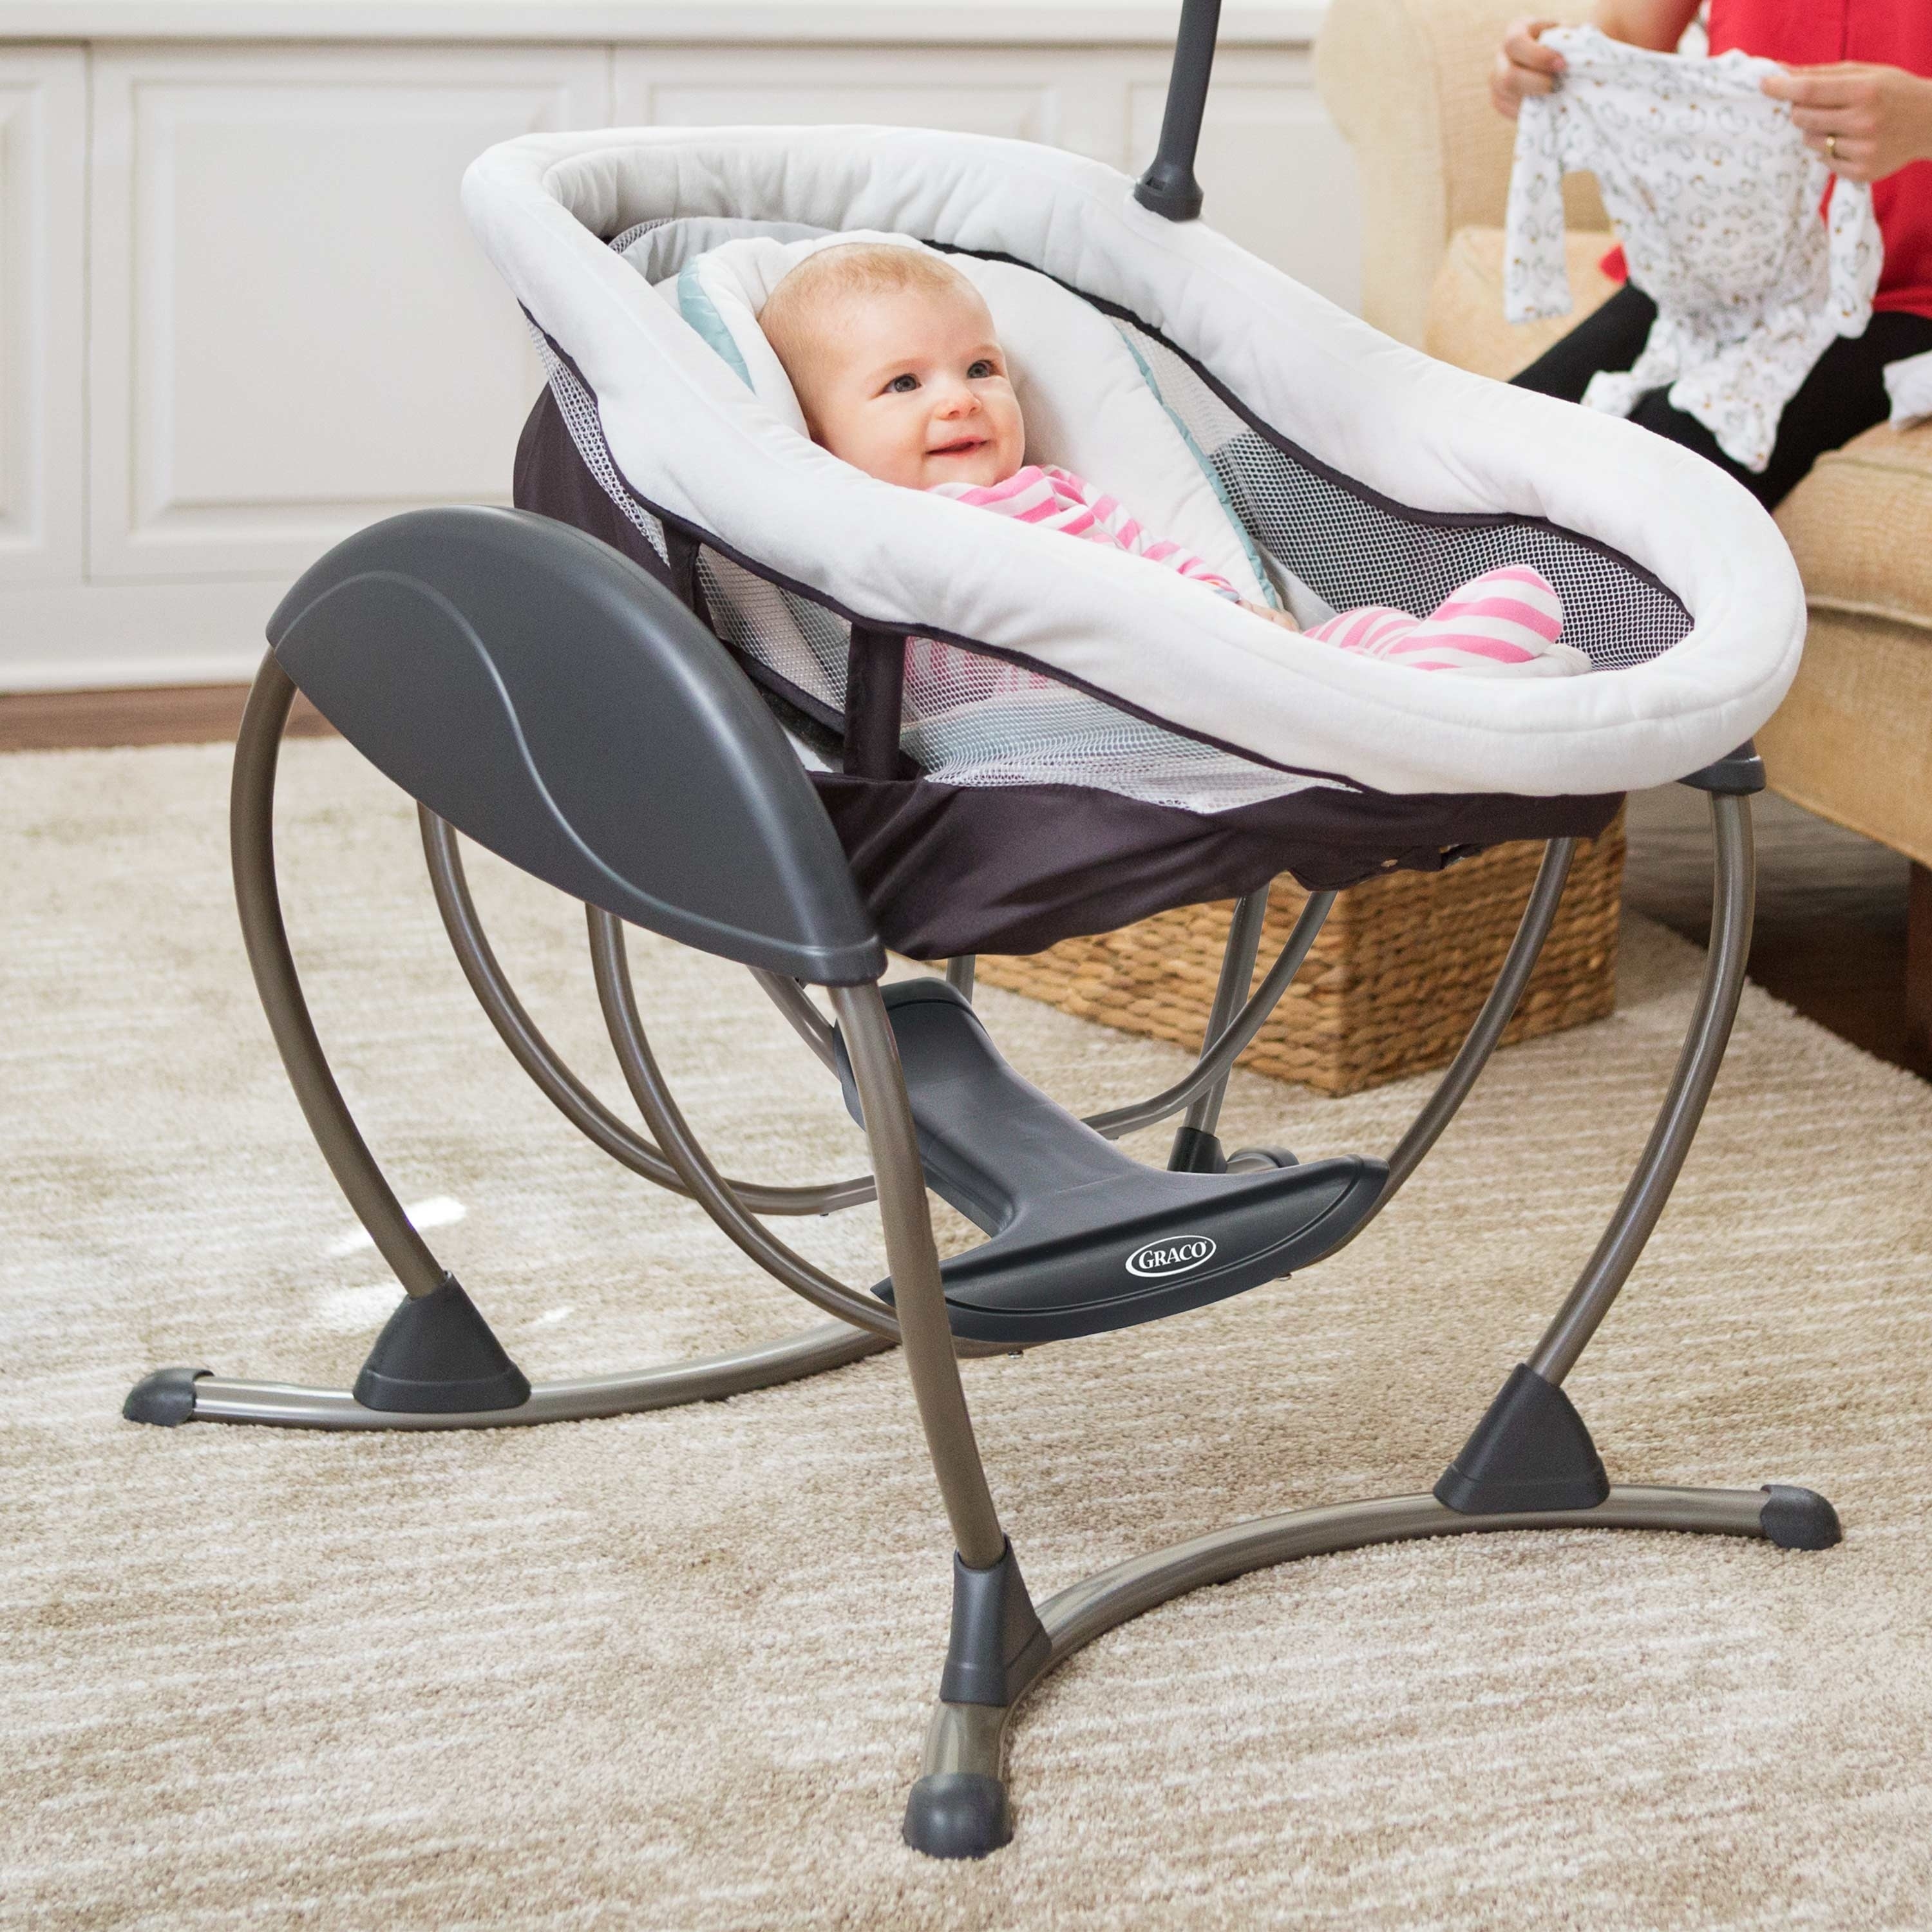 graco dreamglider gliding baby swing and sleeper